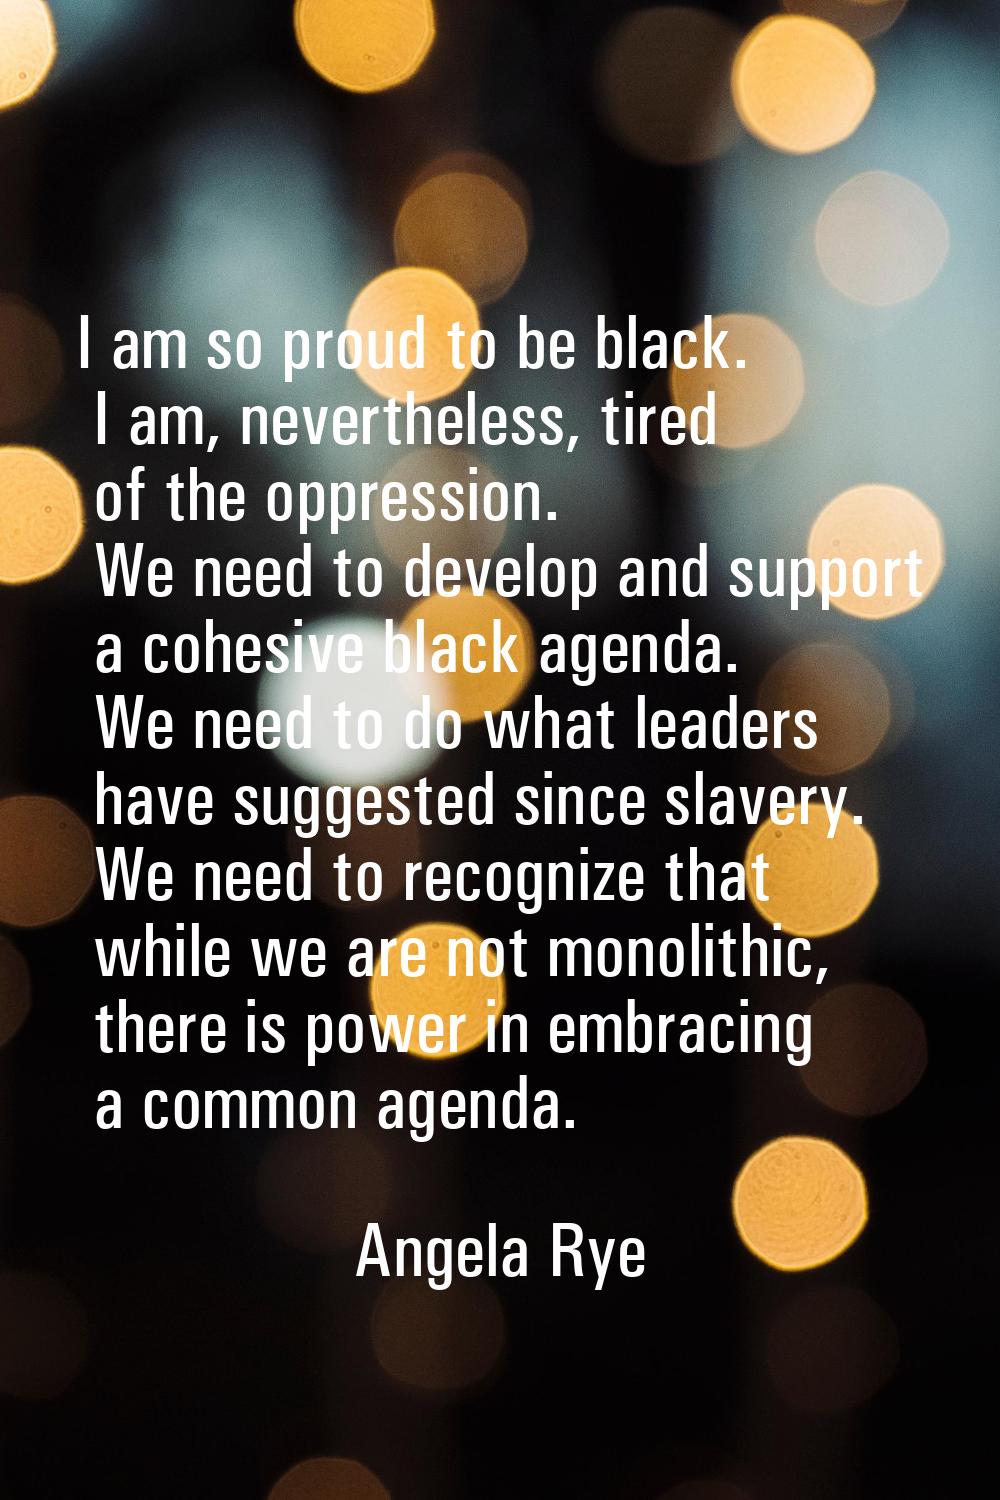 I am so proud to be black. I am, nevertheless, tired of the oppression. We need to develop and supp